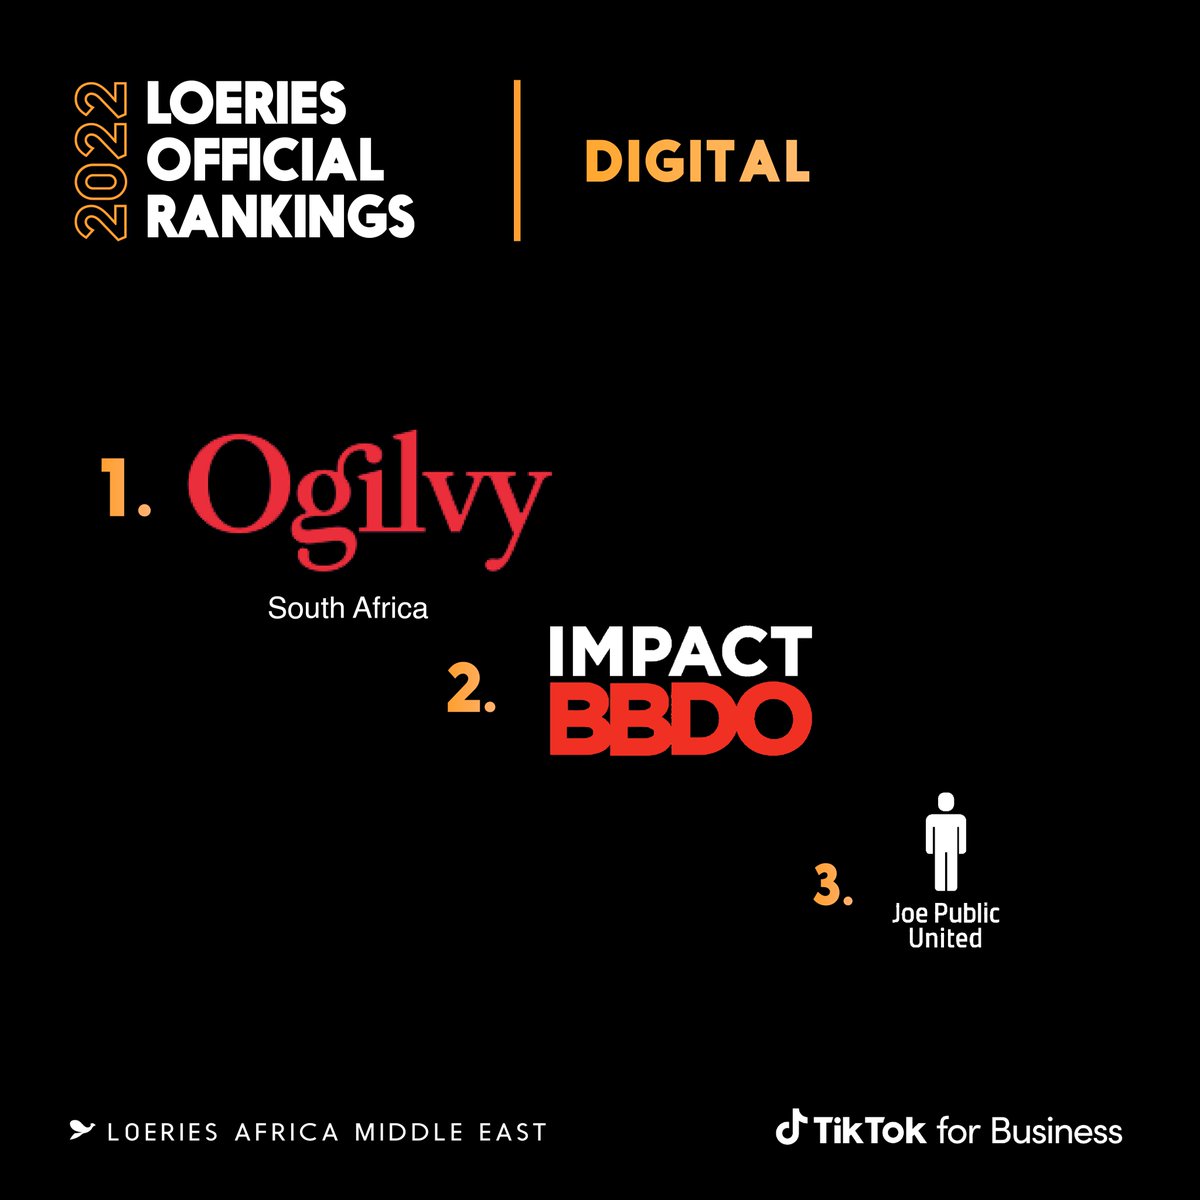 The Loeries are excited to announce the highest-ranking agencies in Digital ! #Loeries #LoeriesOfficialRankings2022 #Creativity